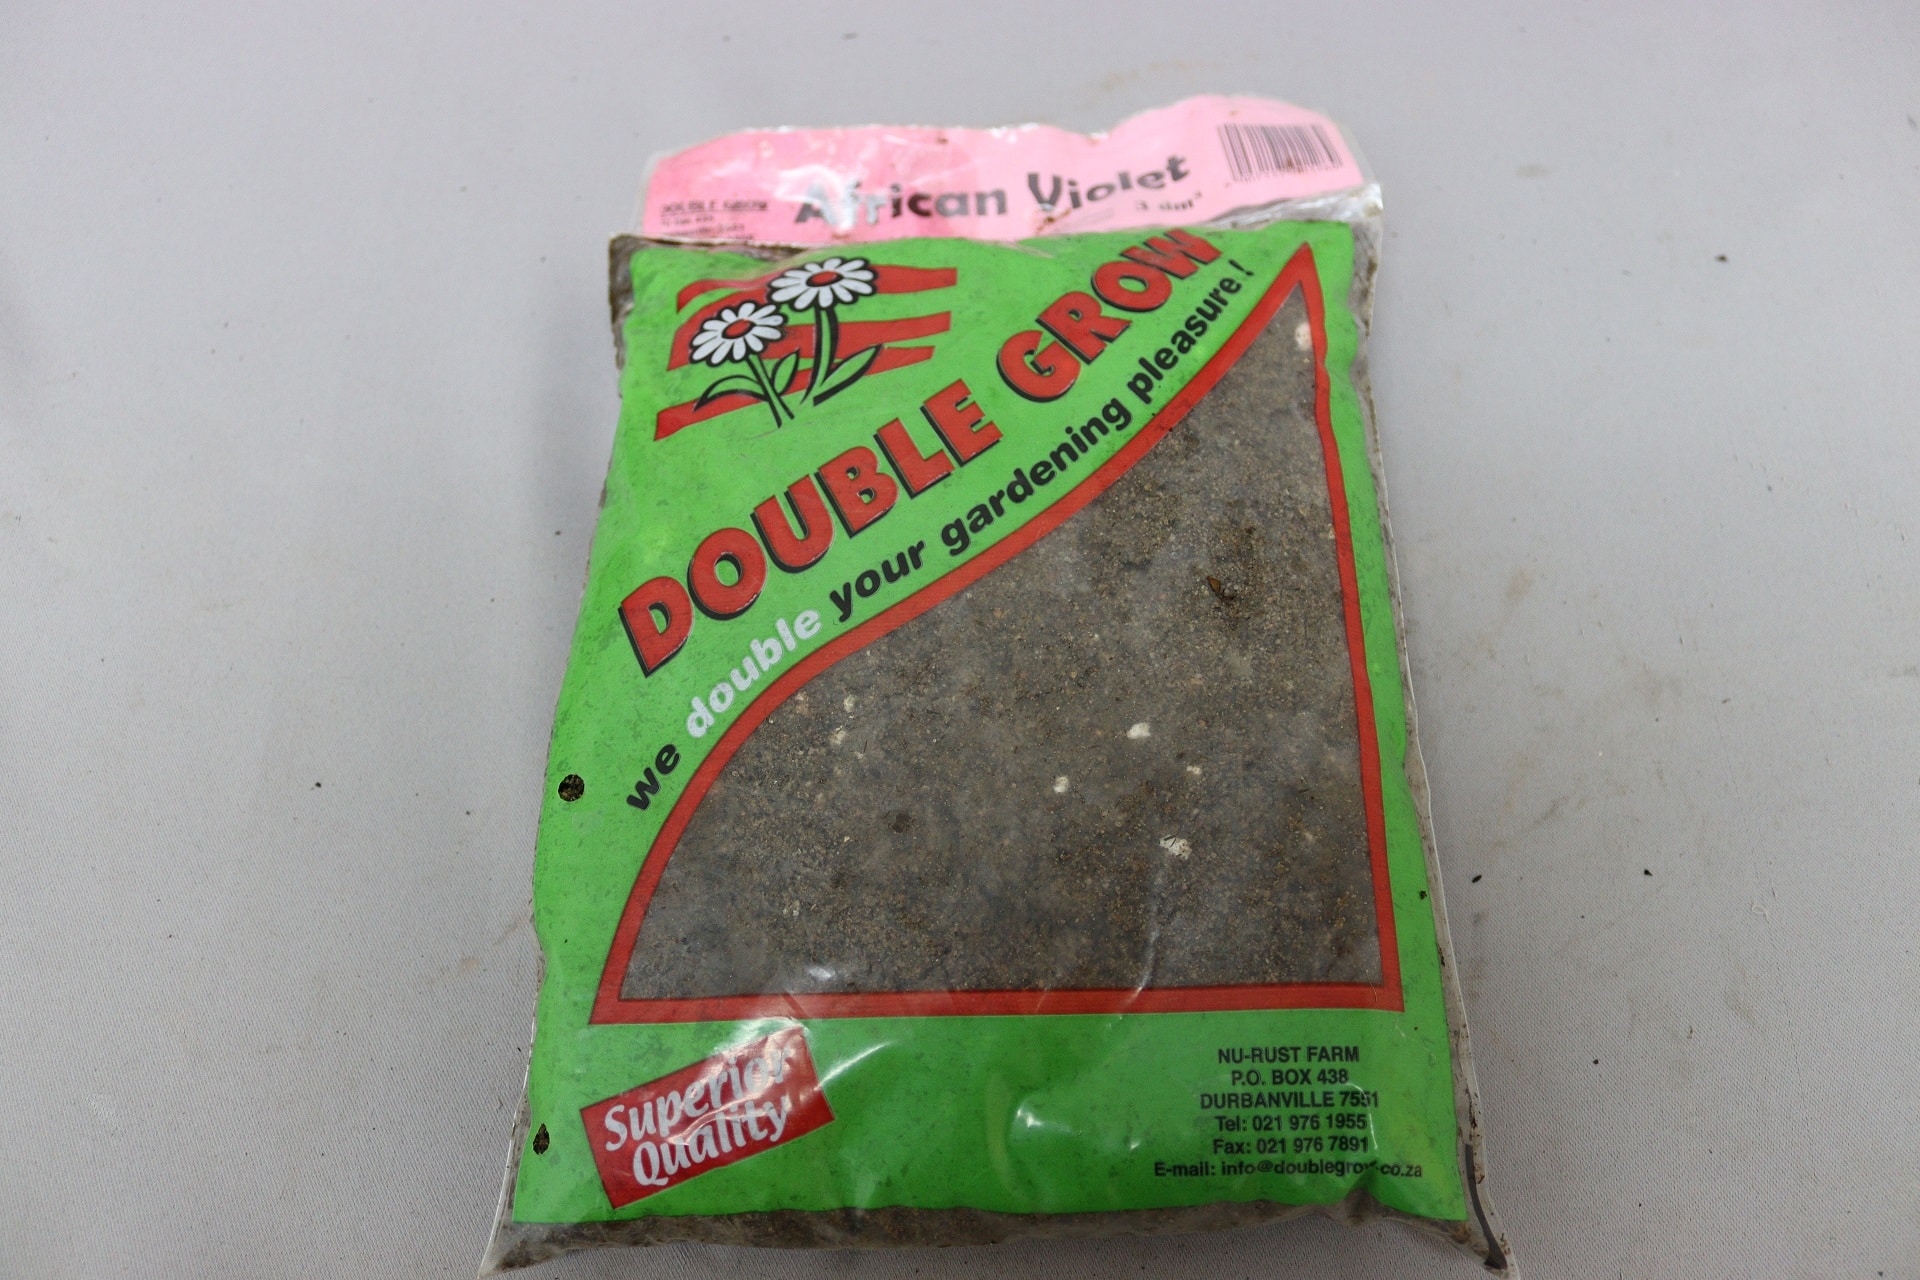 3DM bag of Double Grow soil mix for African Violets.